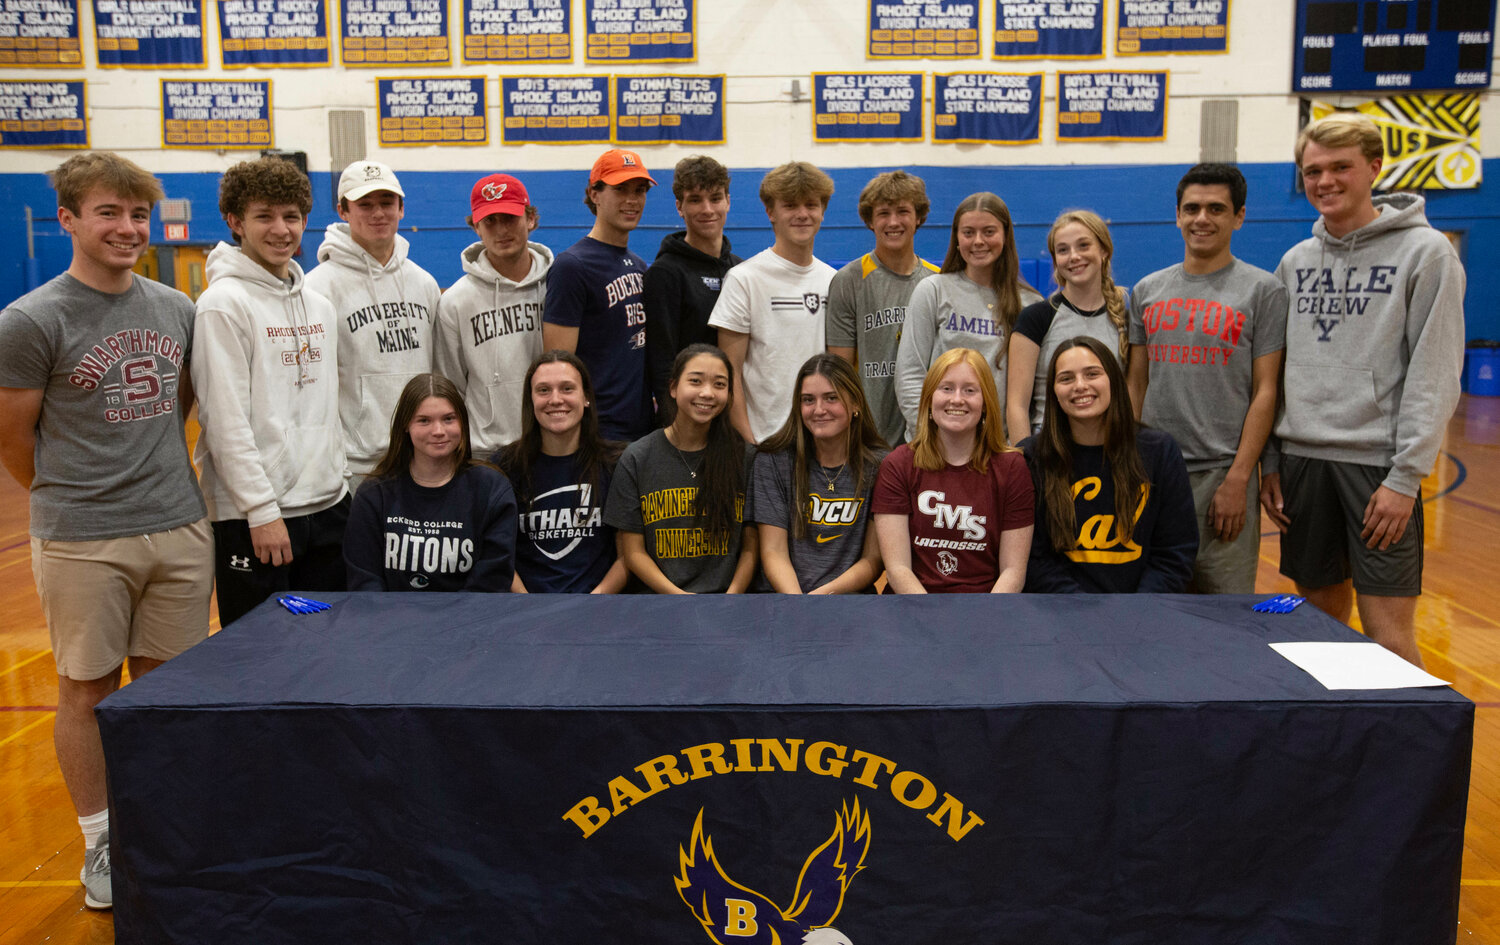 Barrington High School held a special National Letter of Intent signing day event last week.